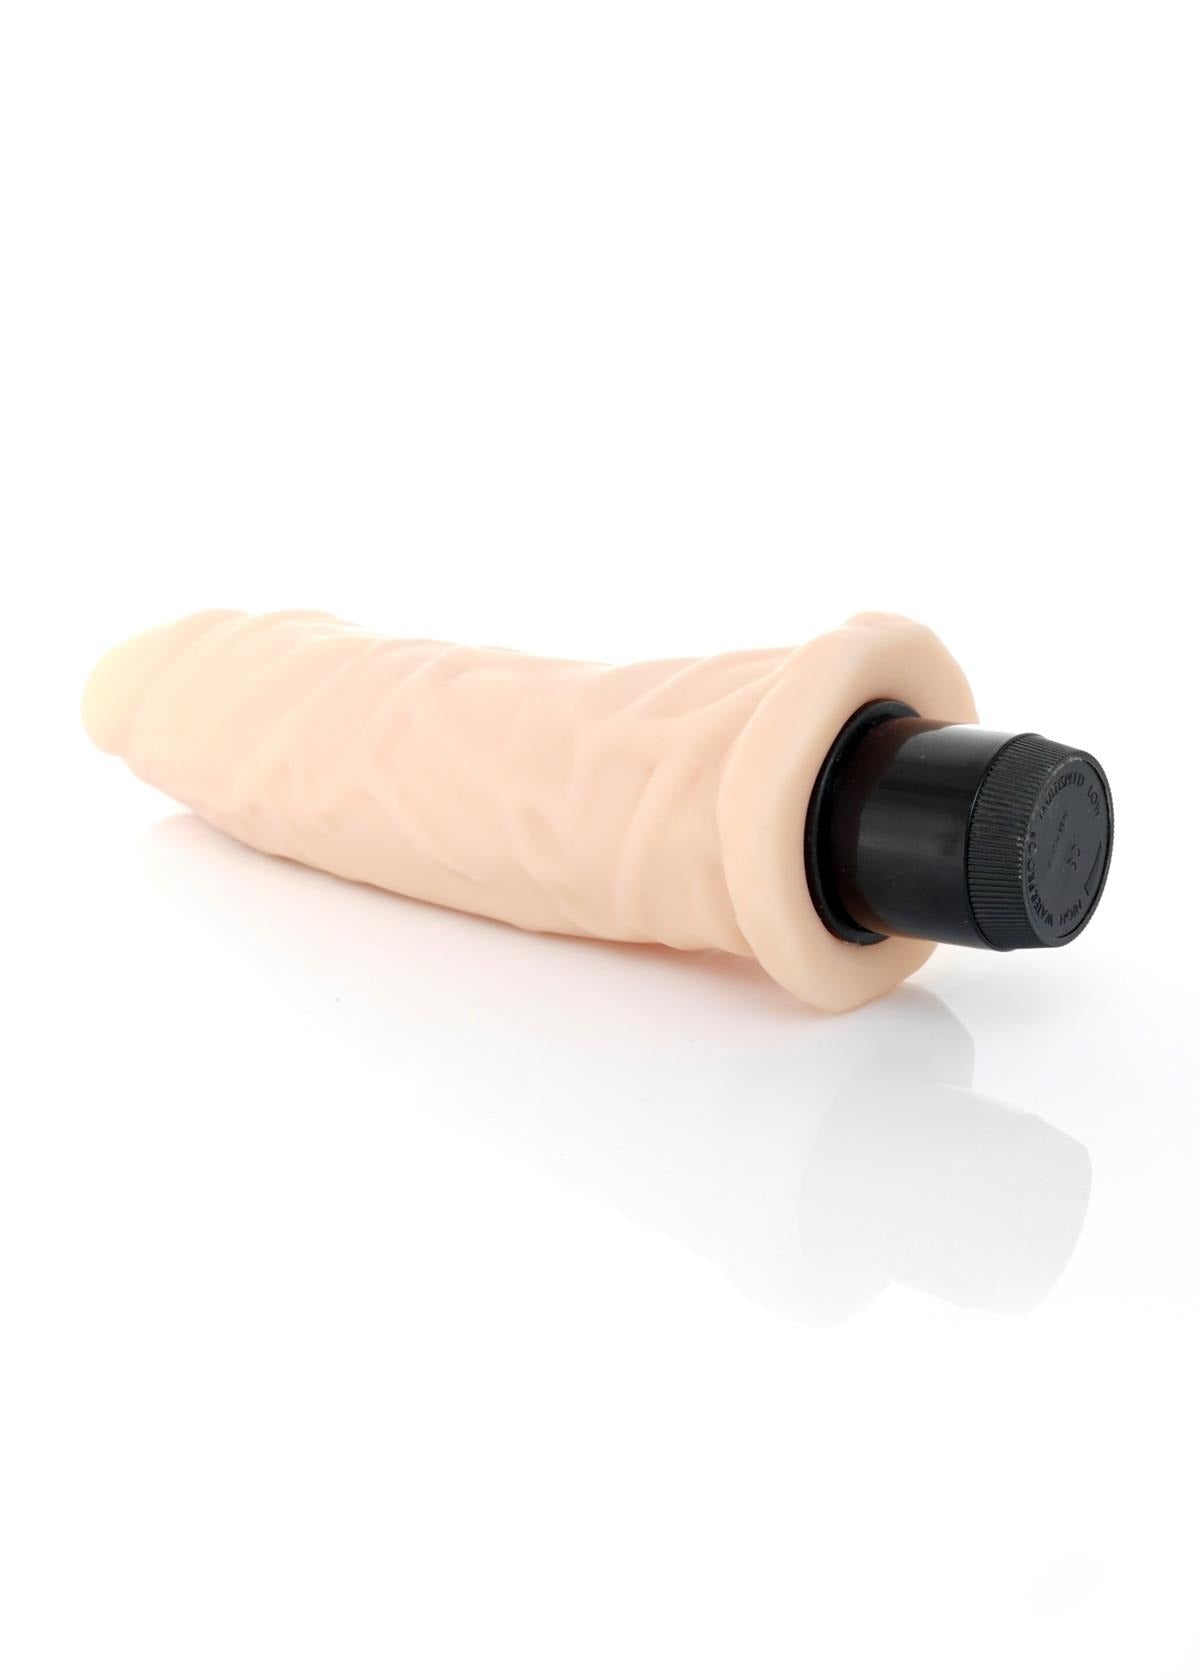 Bossoftoys Drizzle Realistic vibrator - Cyber leather - Extra ordinary Flexible Material - Flesh - 19 cm - 44-00005